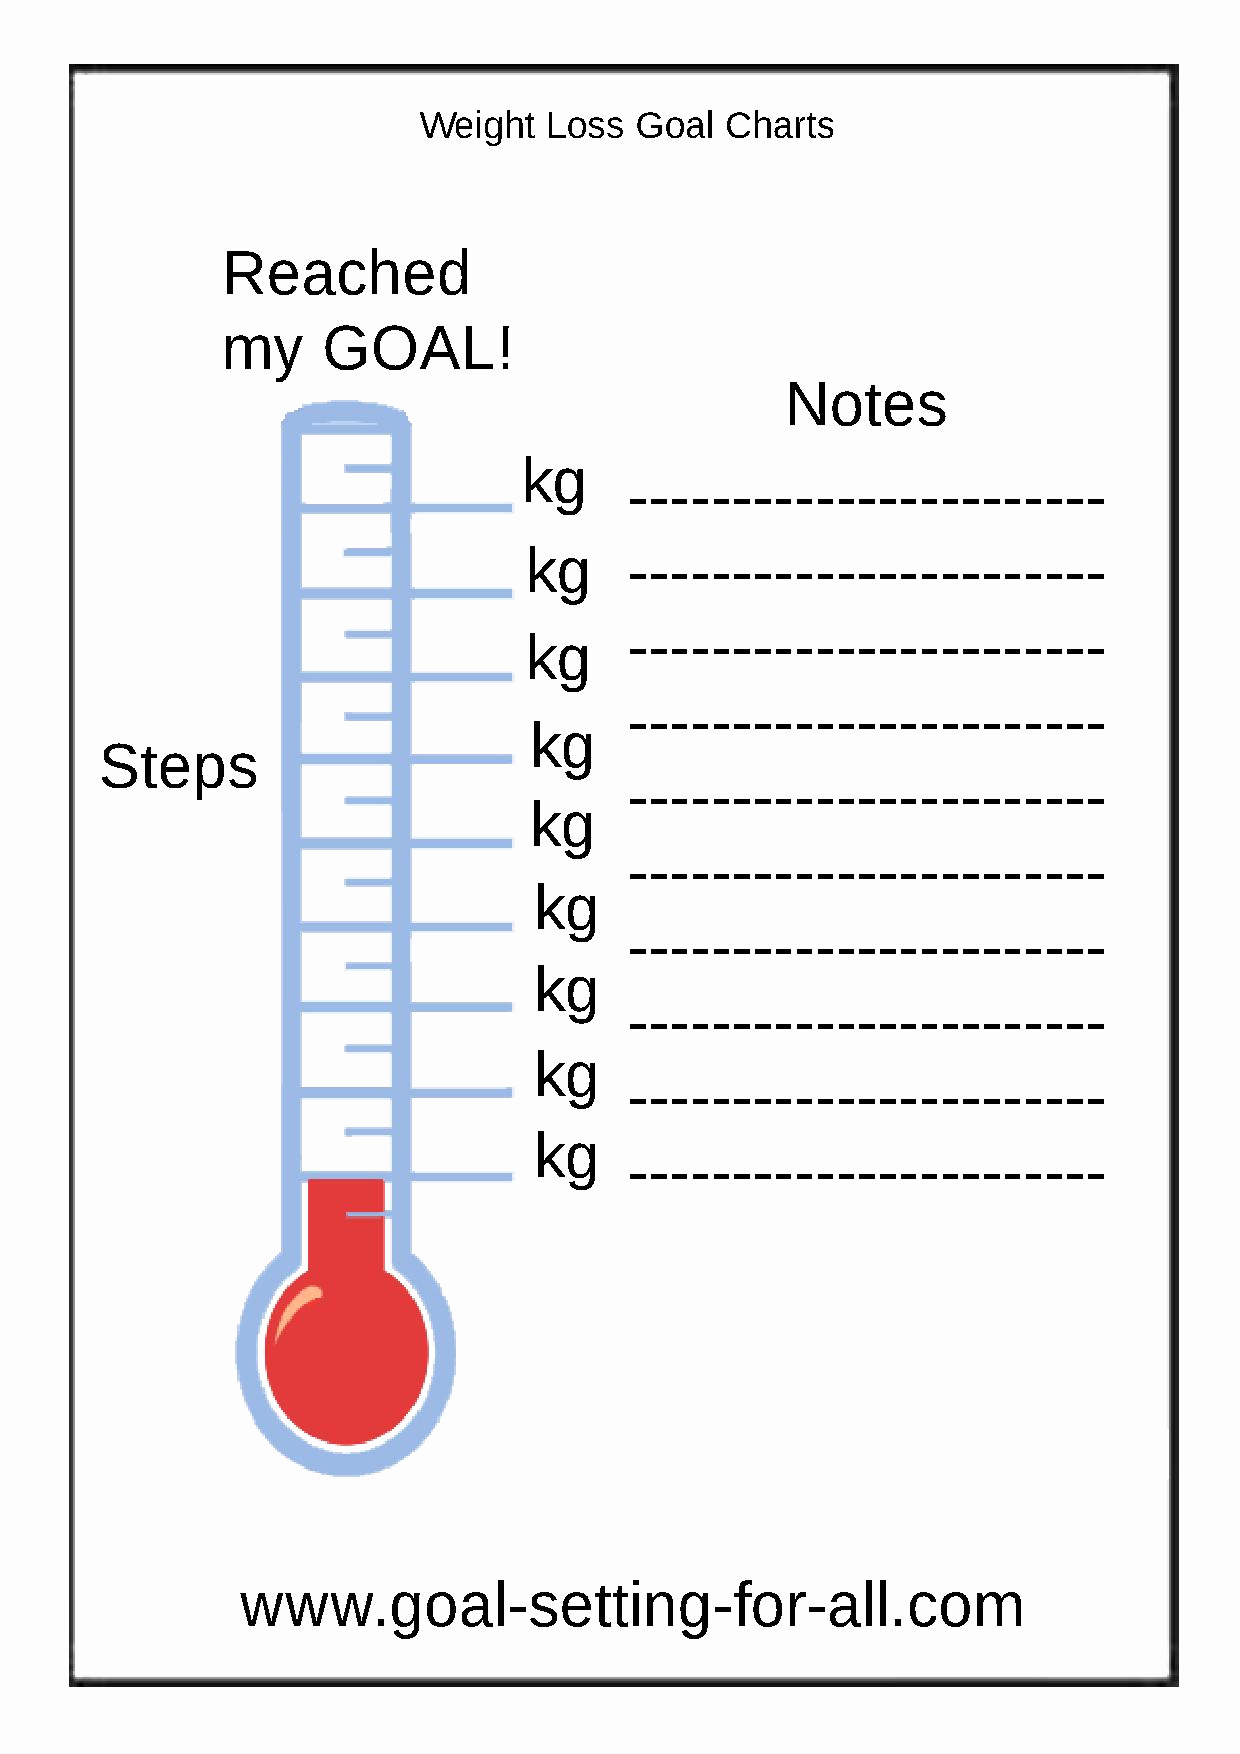 Weight Loss Goal Chart Unique Weight Loss Goal Charts